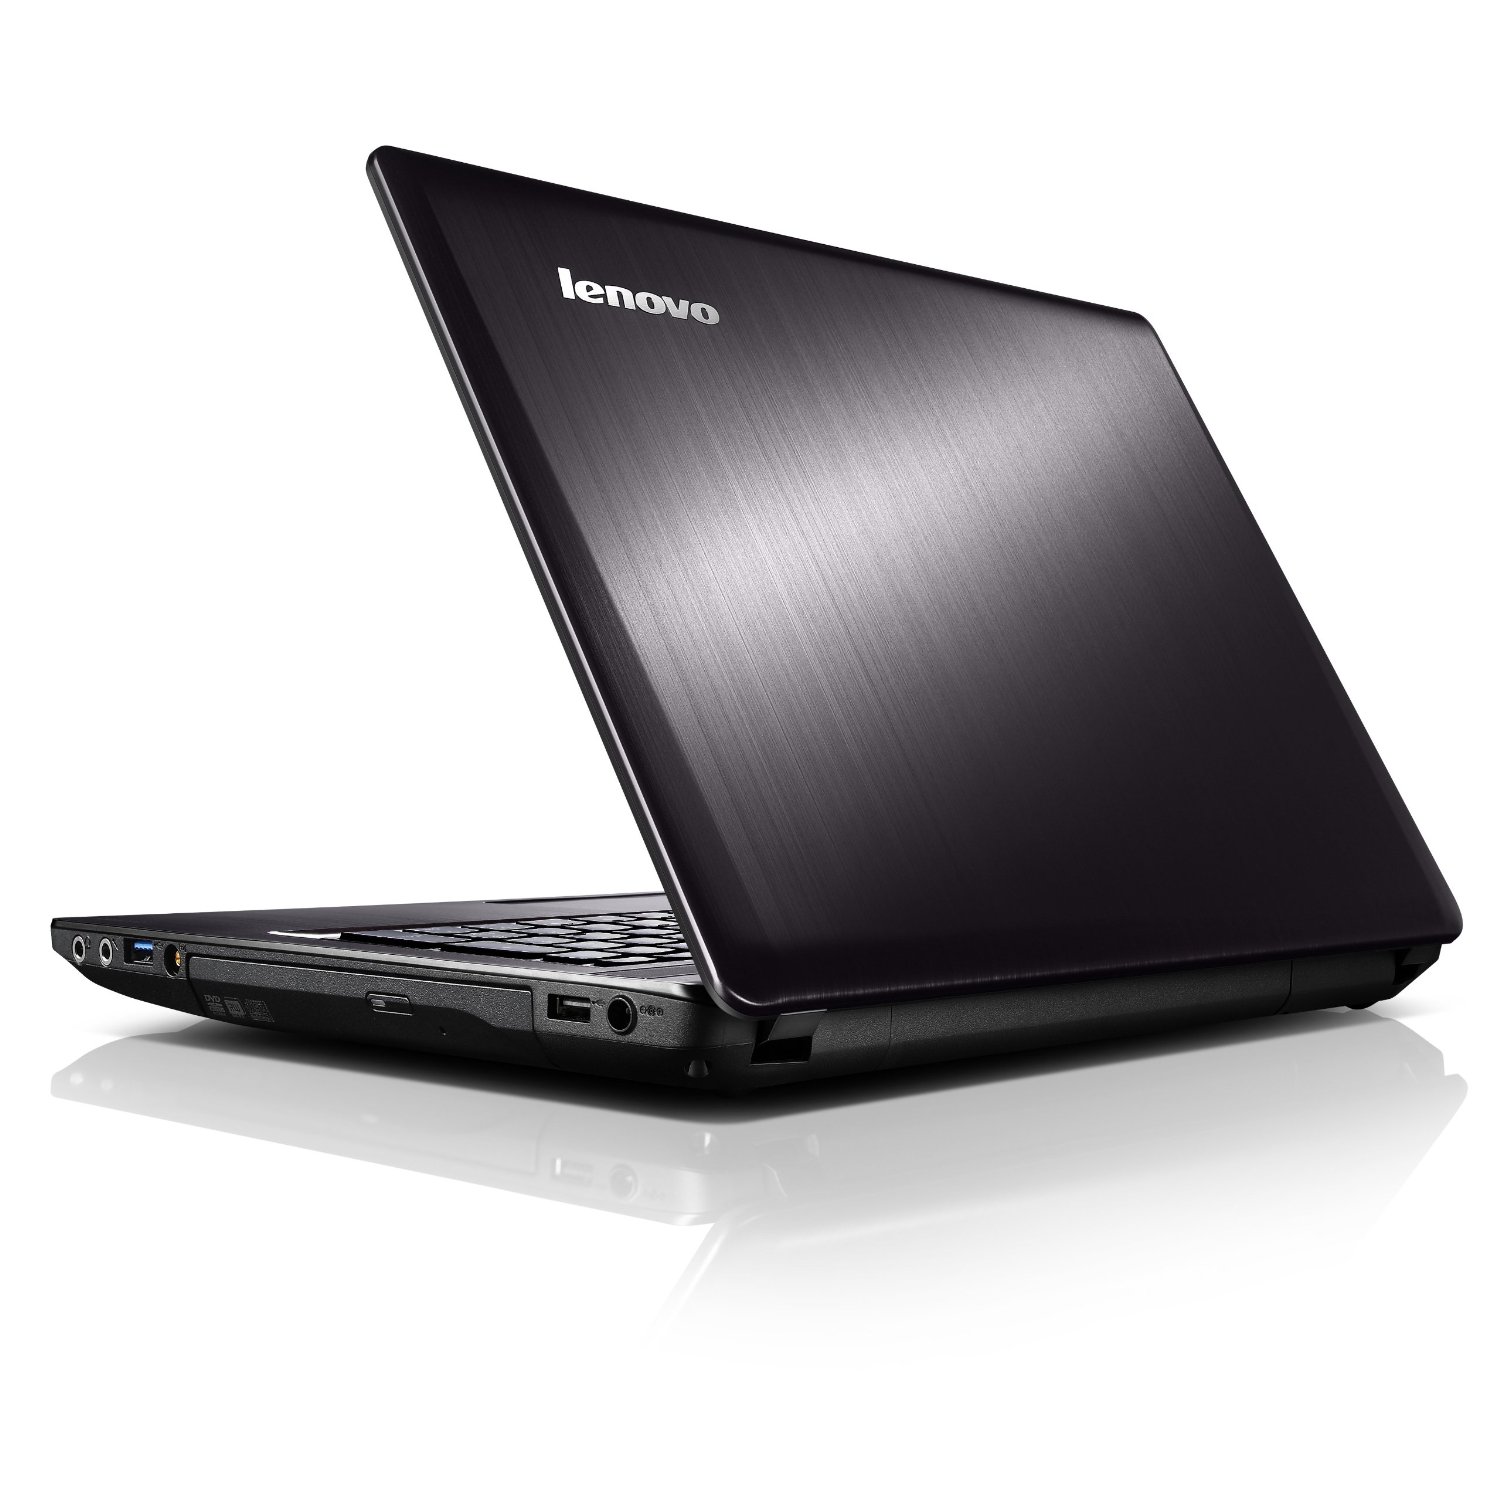 http://thetechjournal.com/wp-content/uploads/images/1209/1346654145-lenovos-bulky-ideapad-y580-156inch-laptop-2.jpg